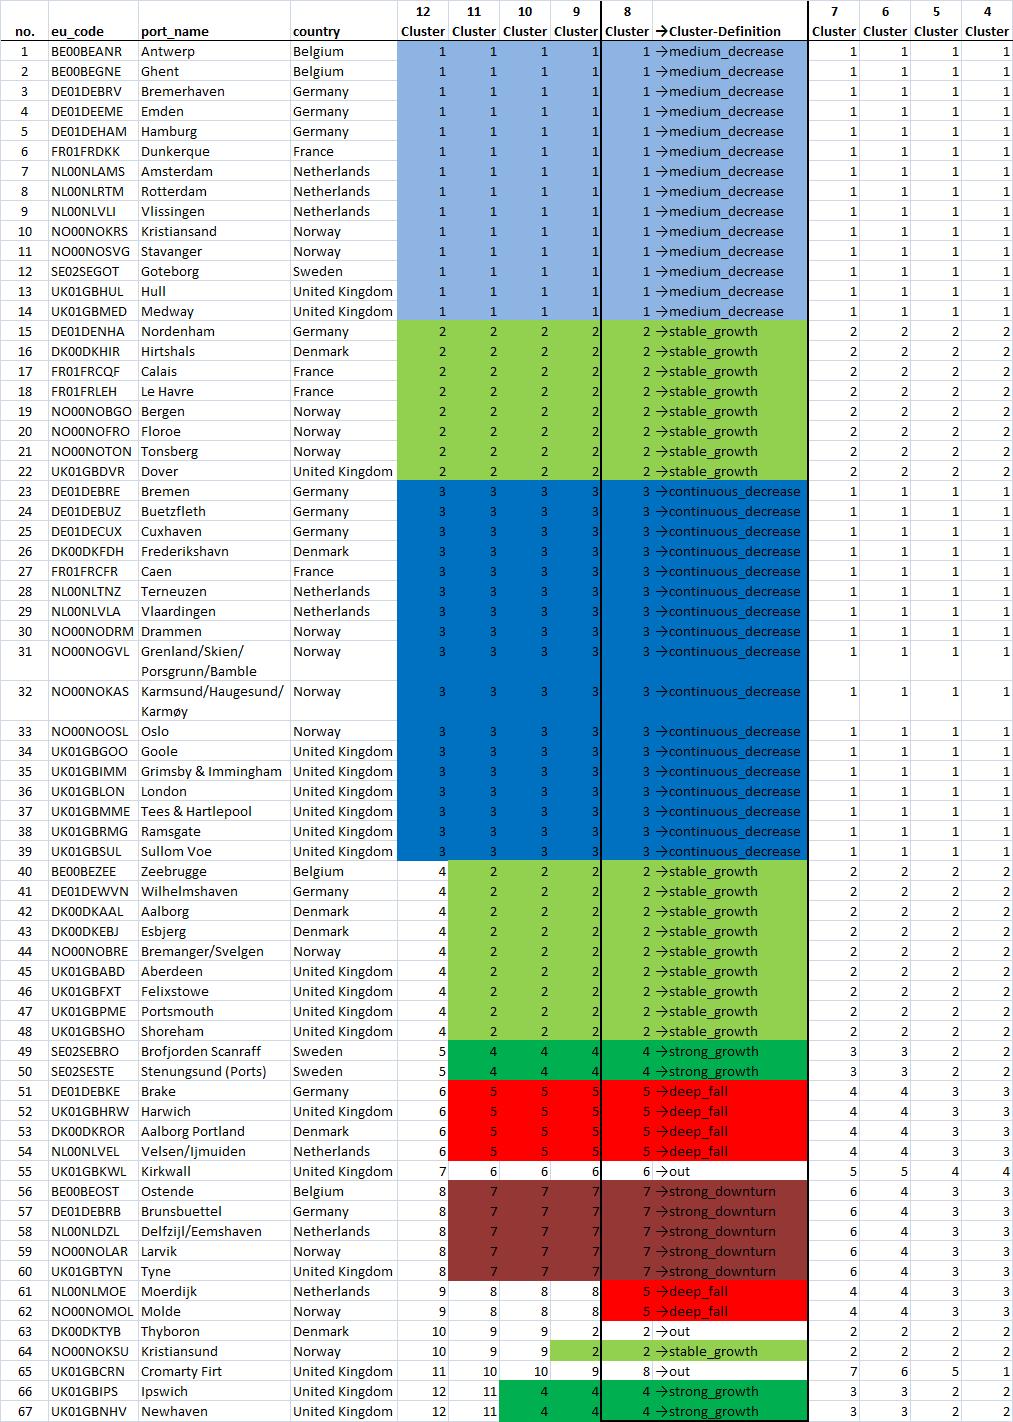 Table 5: Results of the clustering analysis.